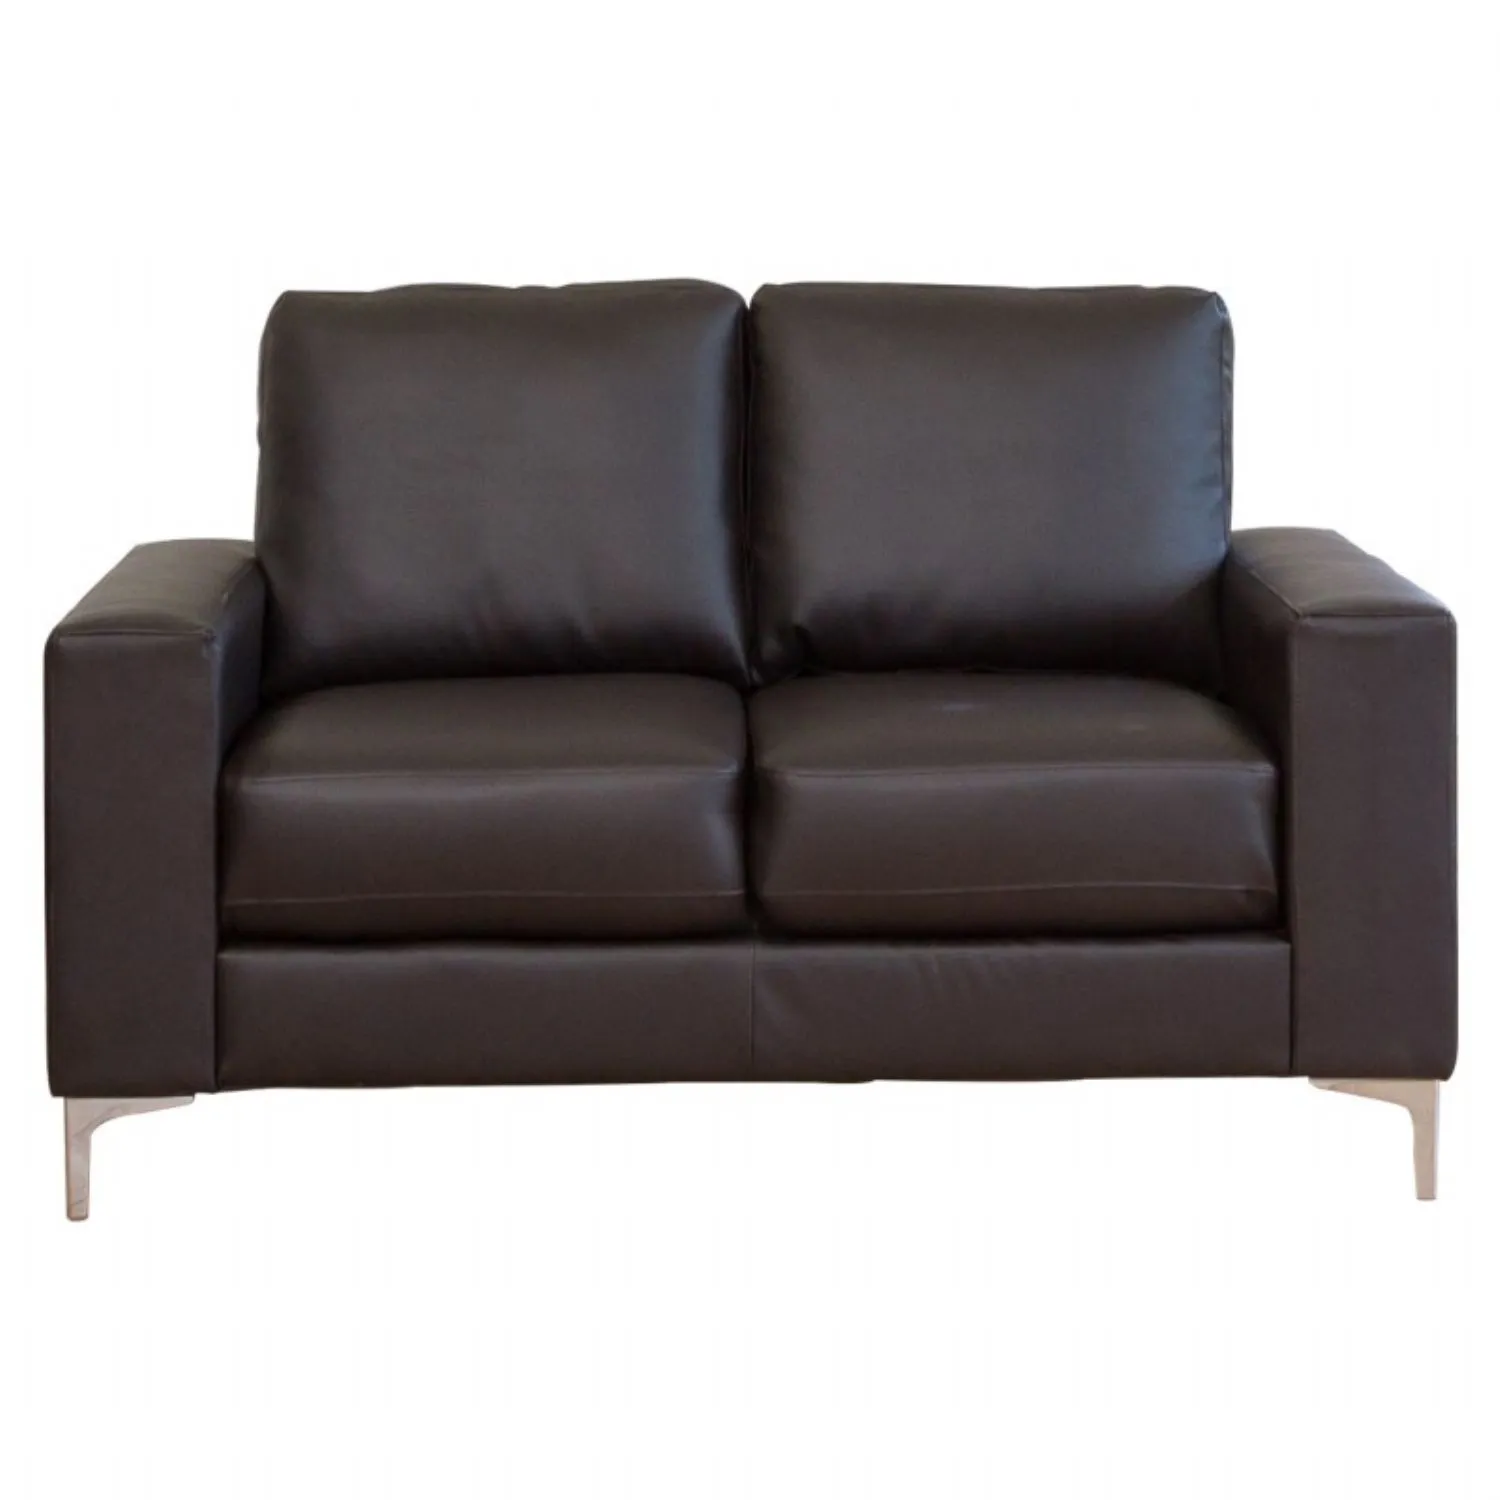 Contract Bonded Leather 2 Seat Sofas